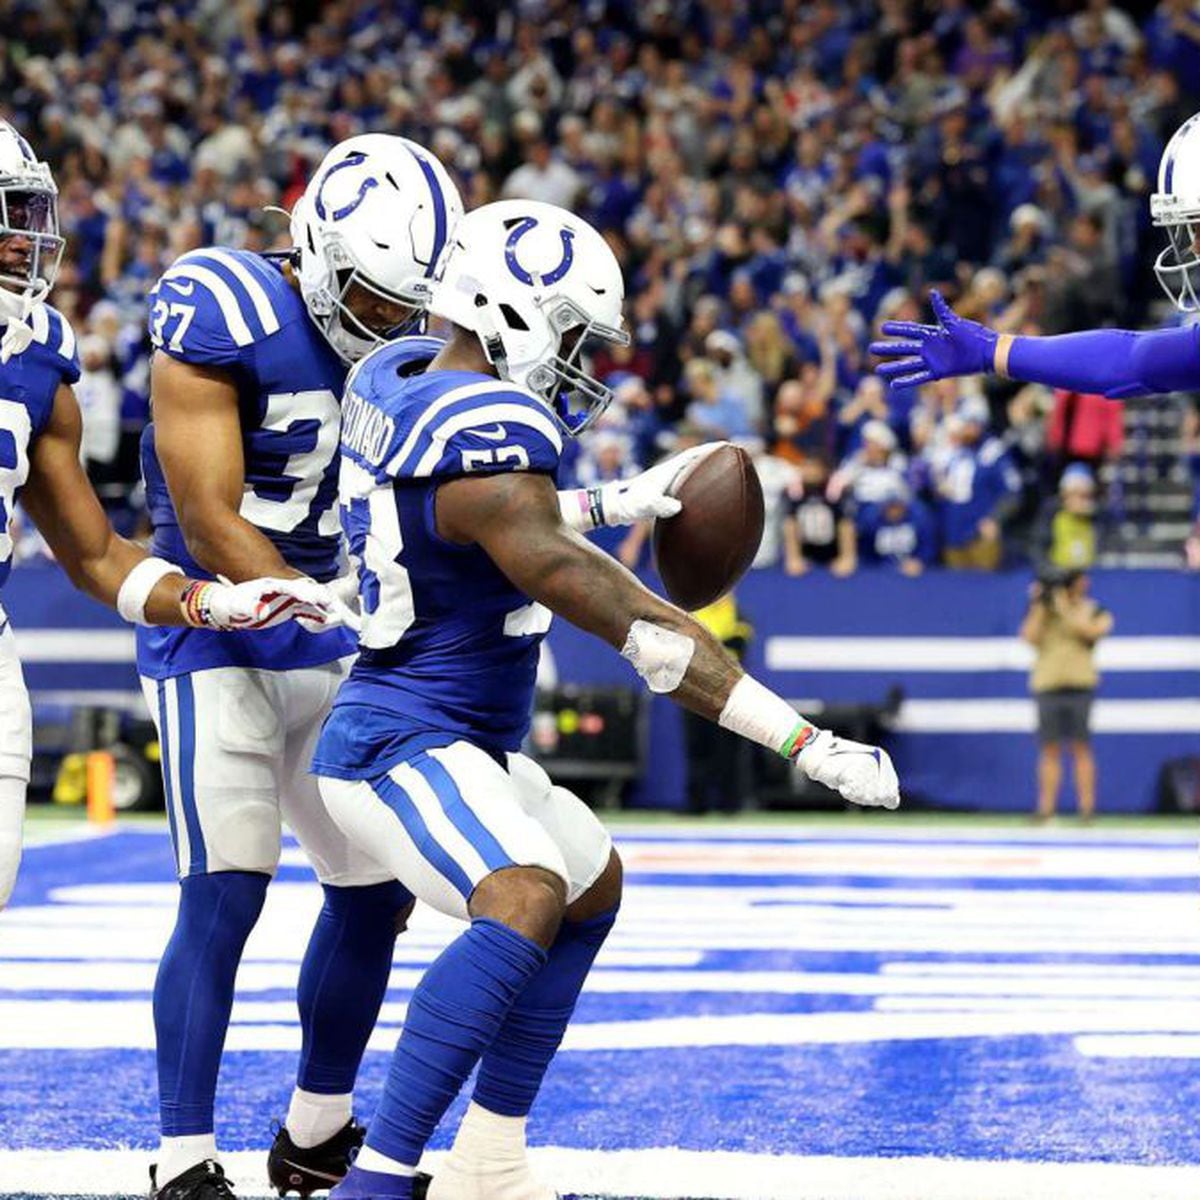 Patriots 17 vs. 27 Colts summary: stats, scores and highlights